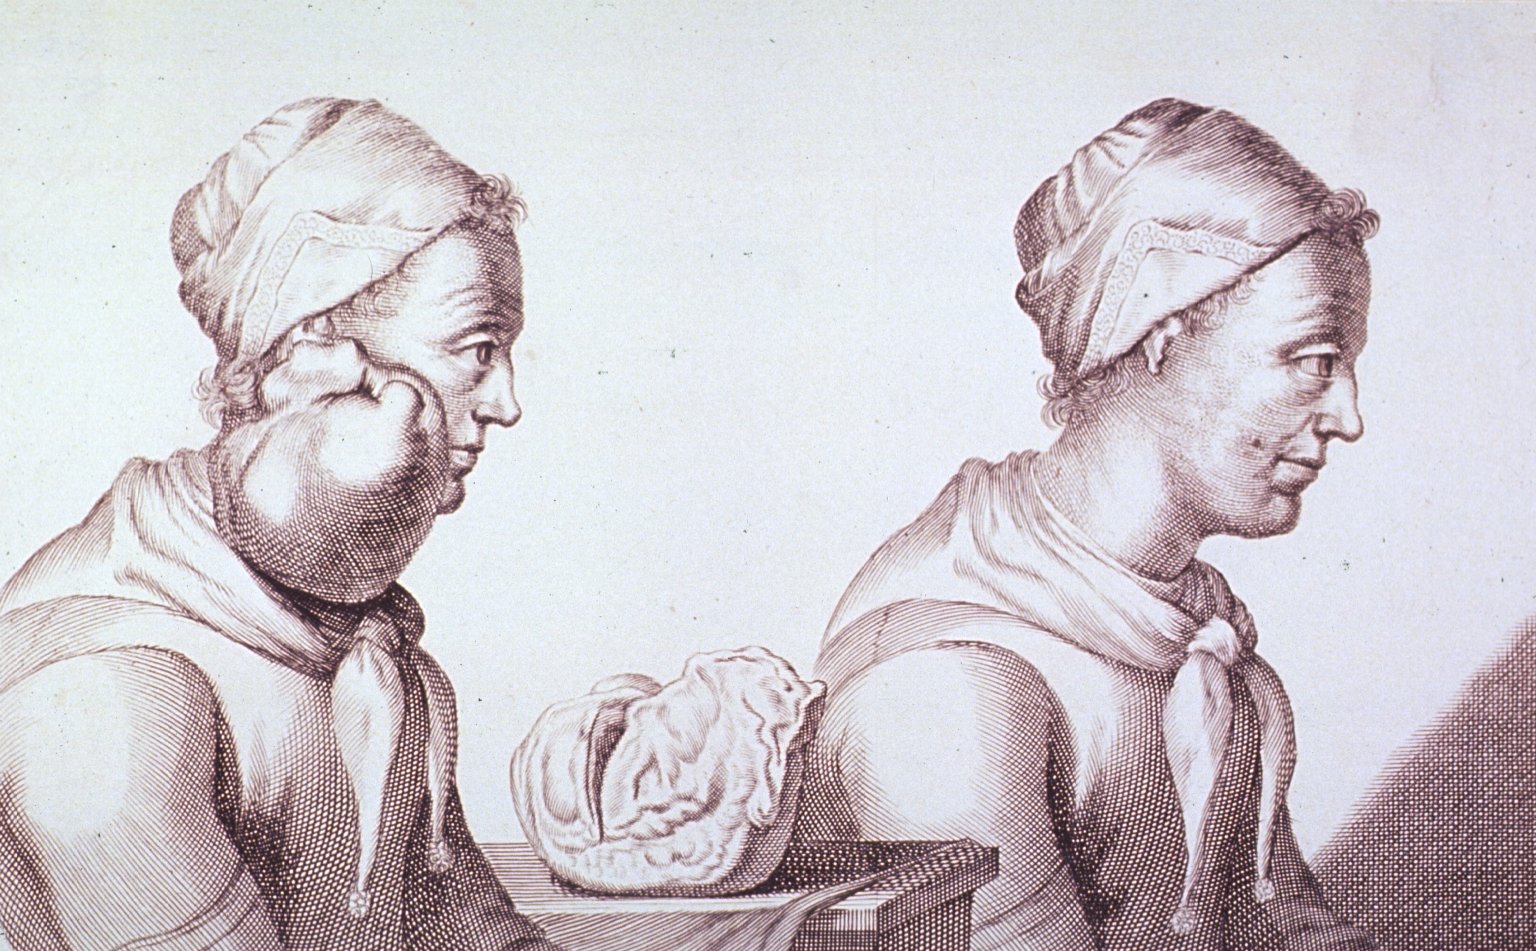 Engraving with two views of a Dutch woman who had a tumour removed from her neck.